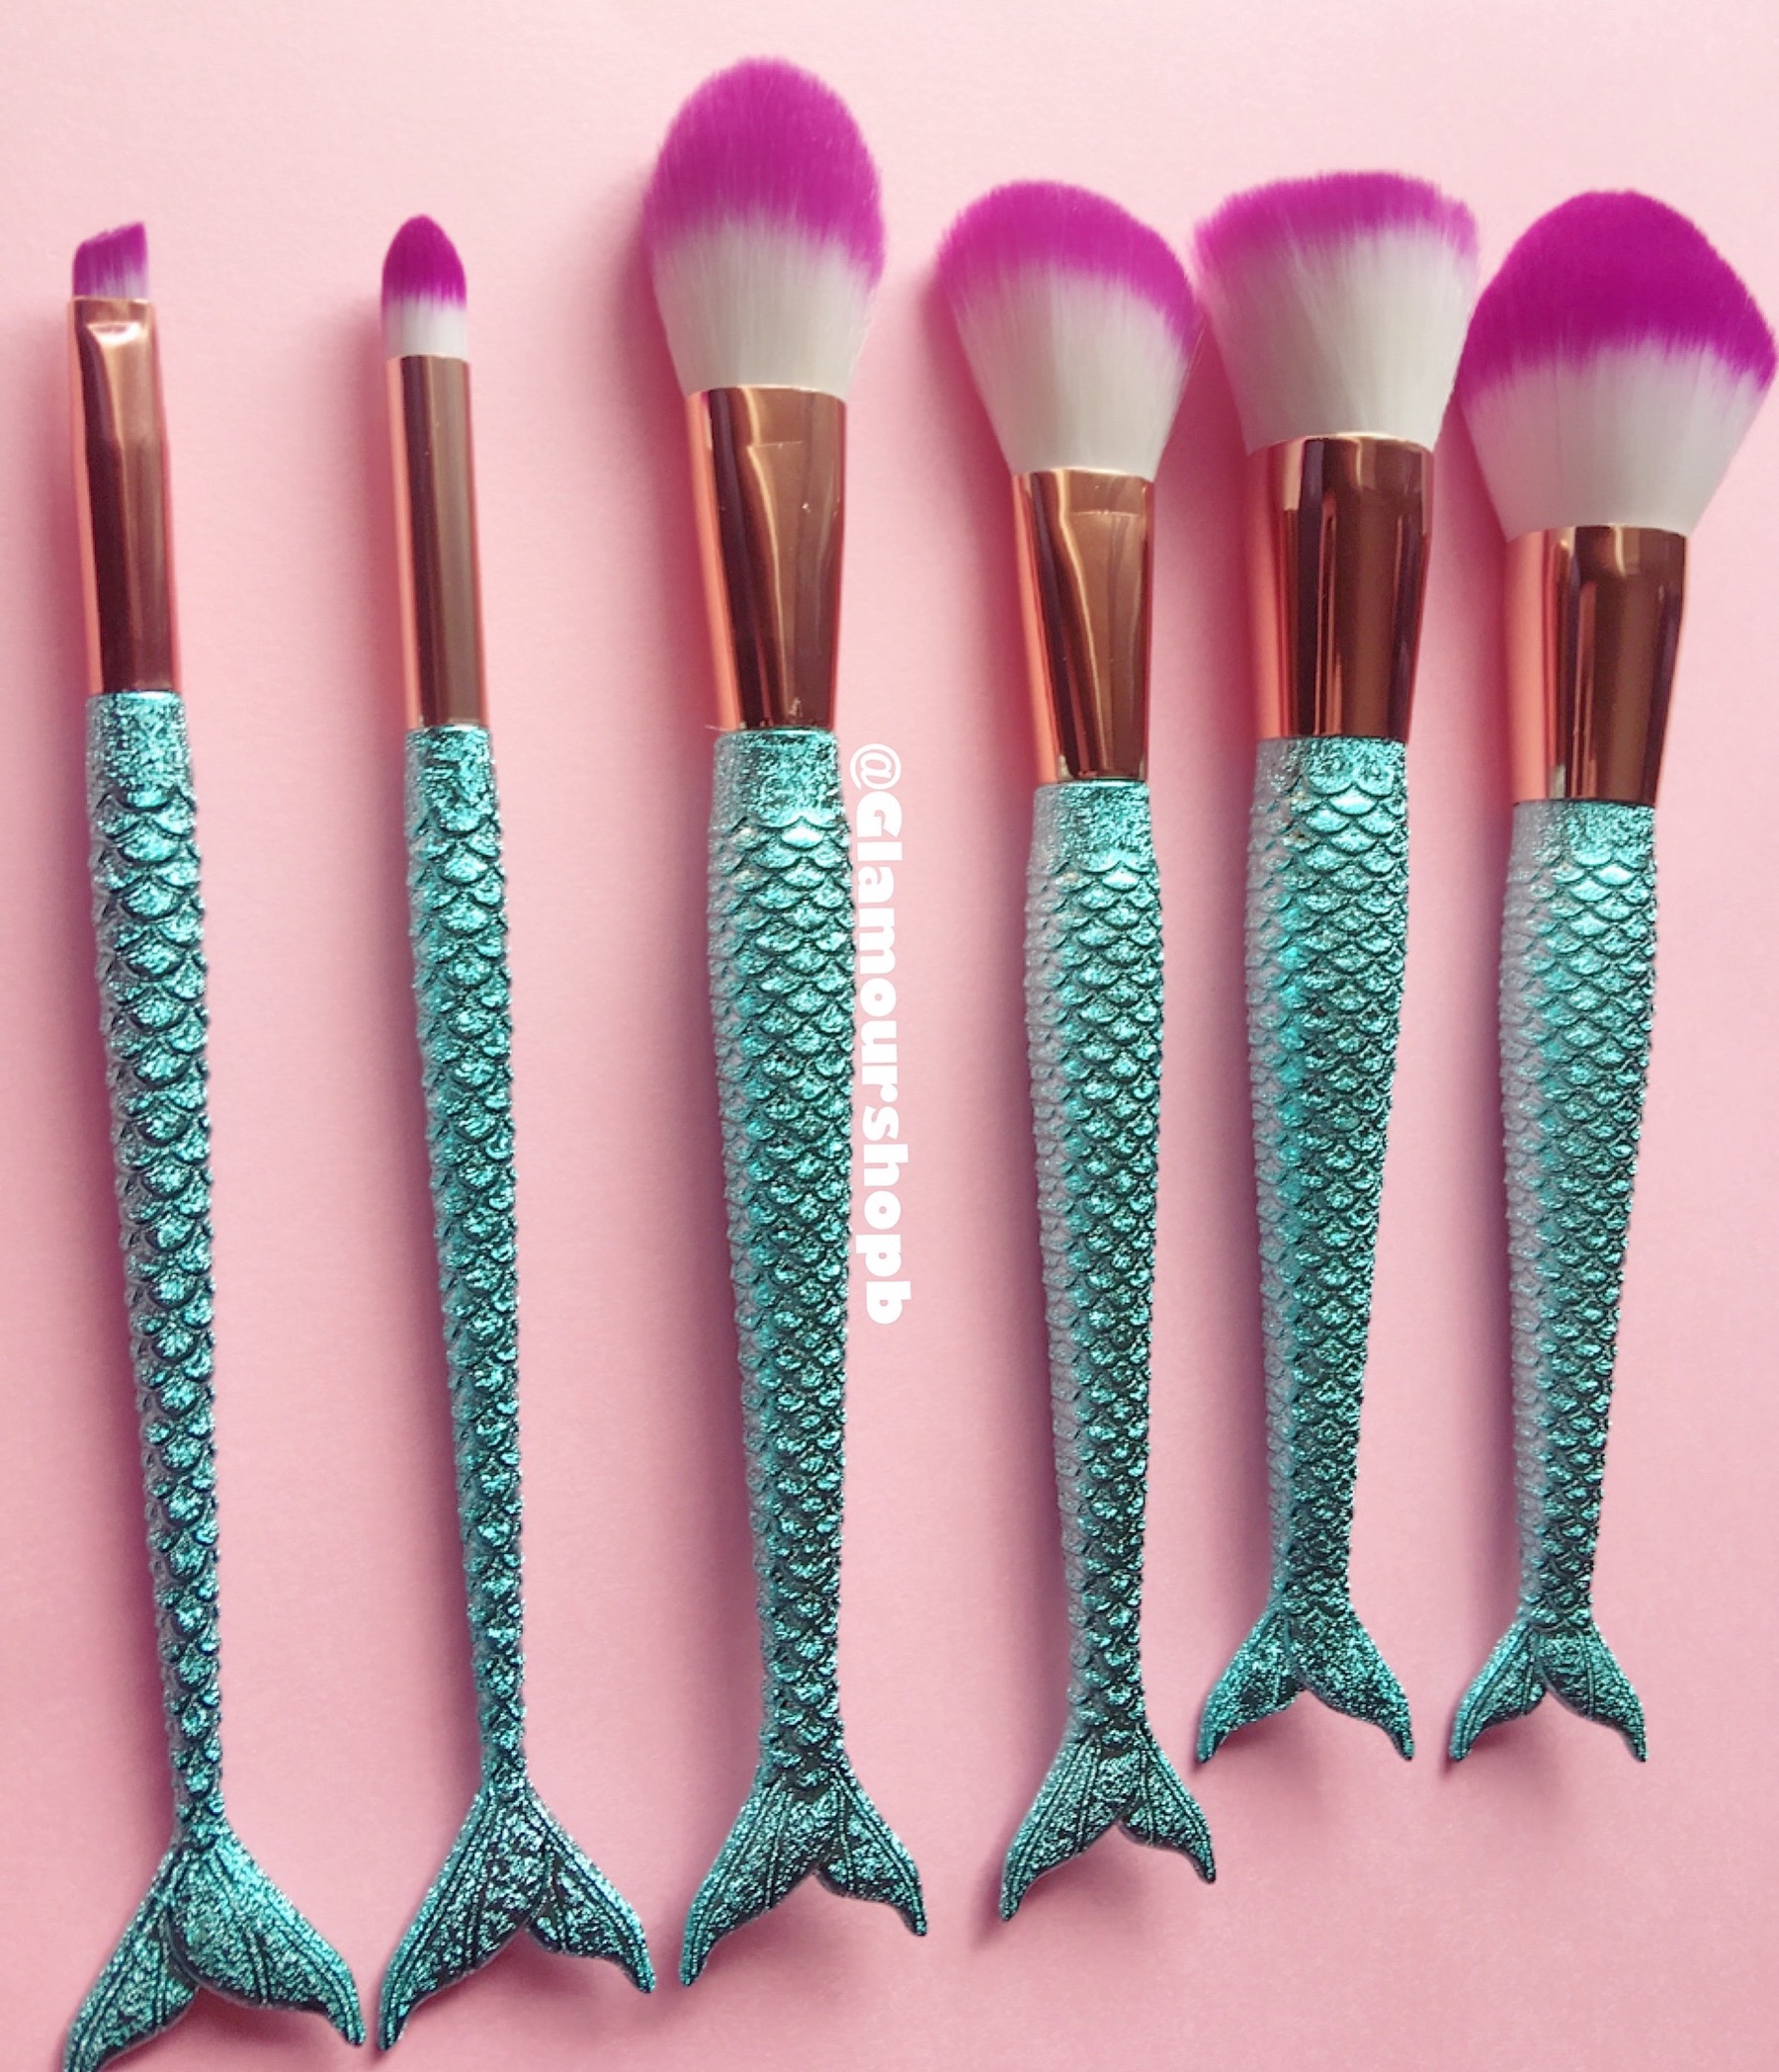 If You Like Thingamabobs, You'll Love Mermaid Makeup Brushes